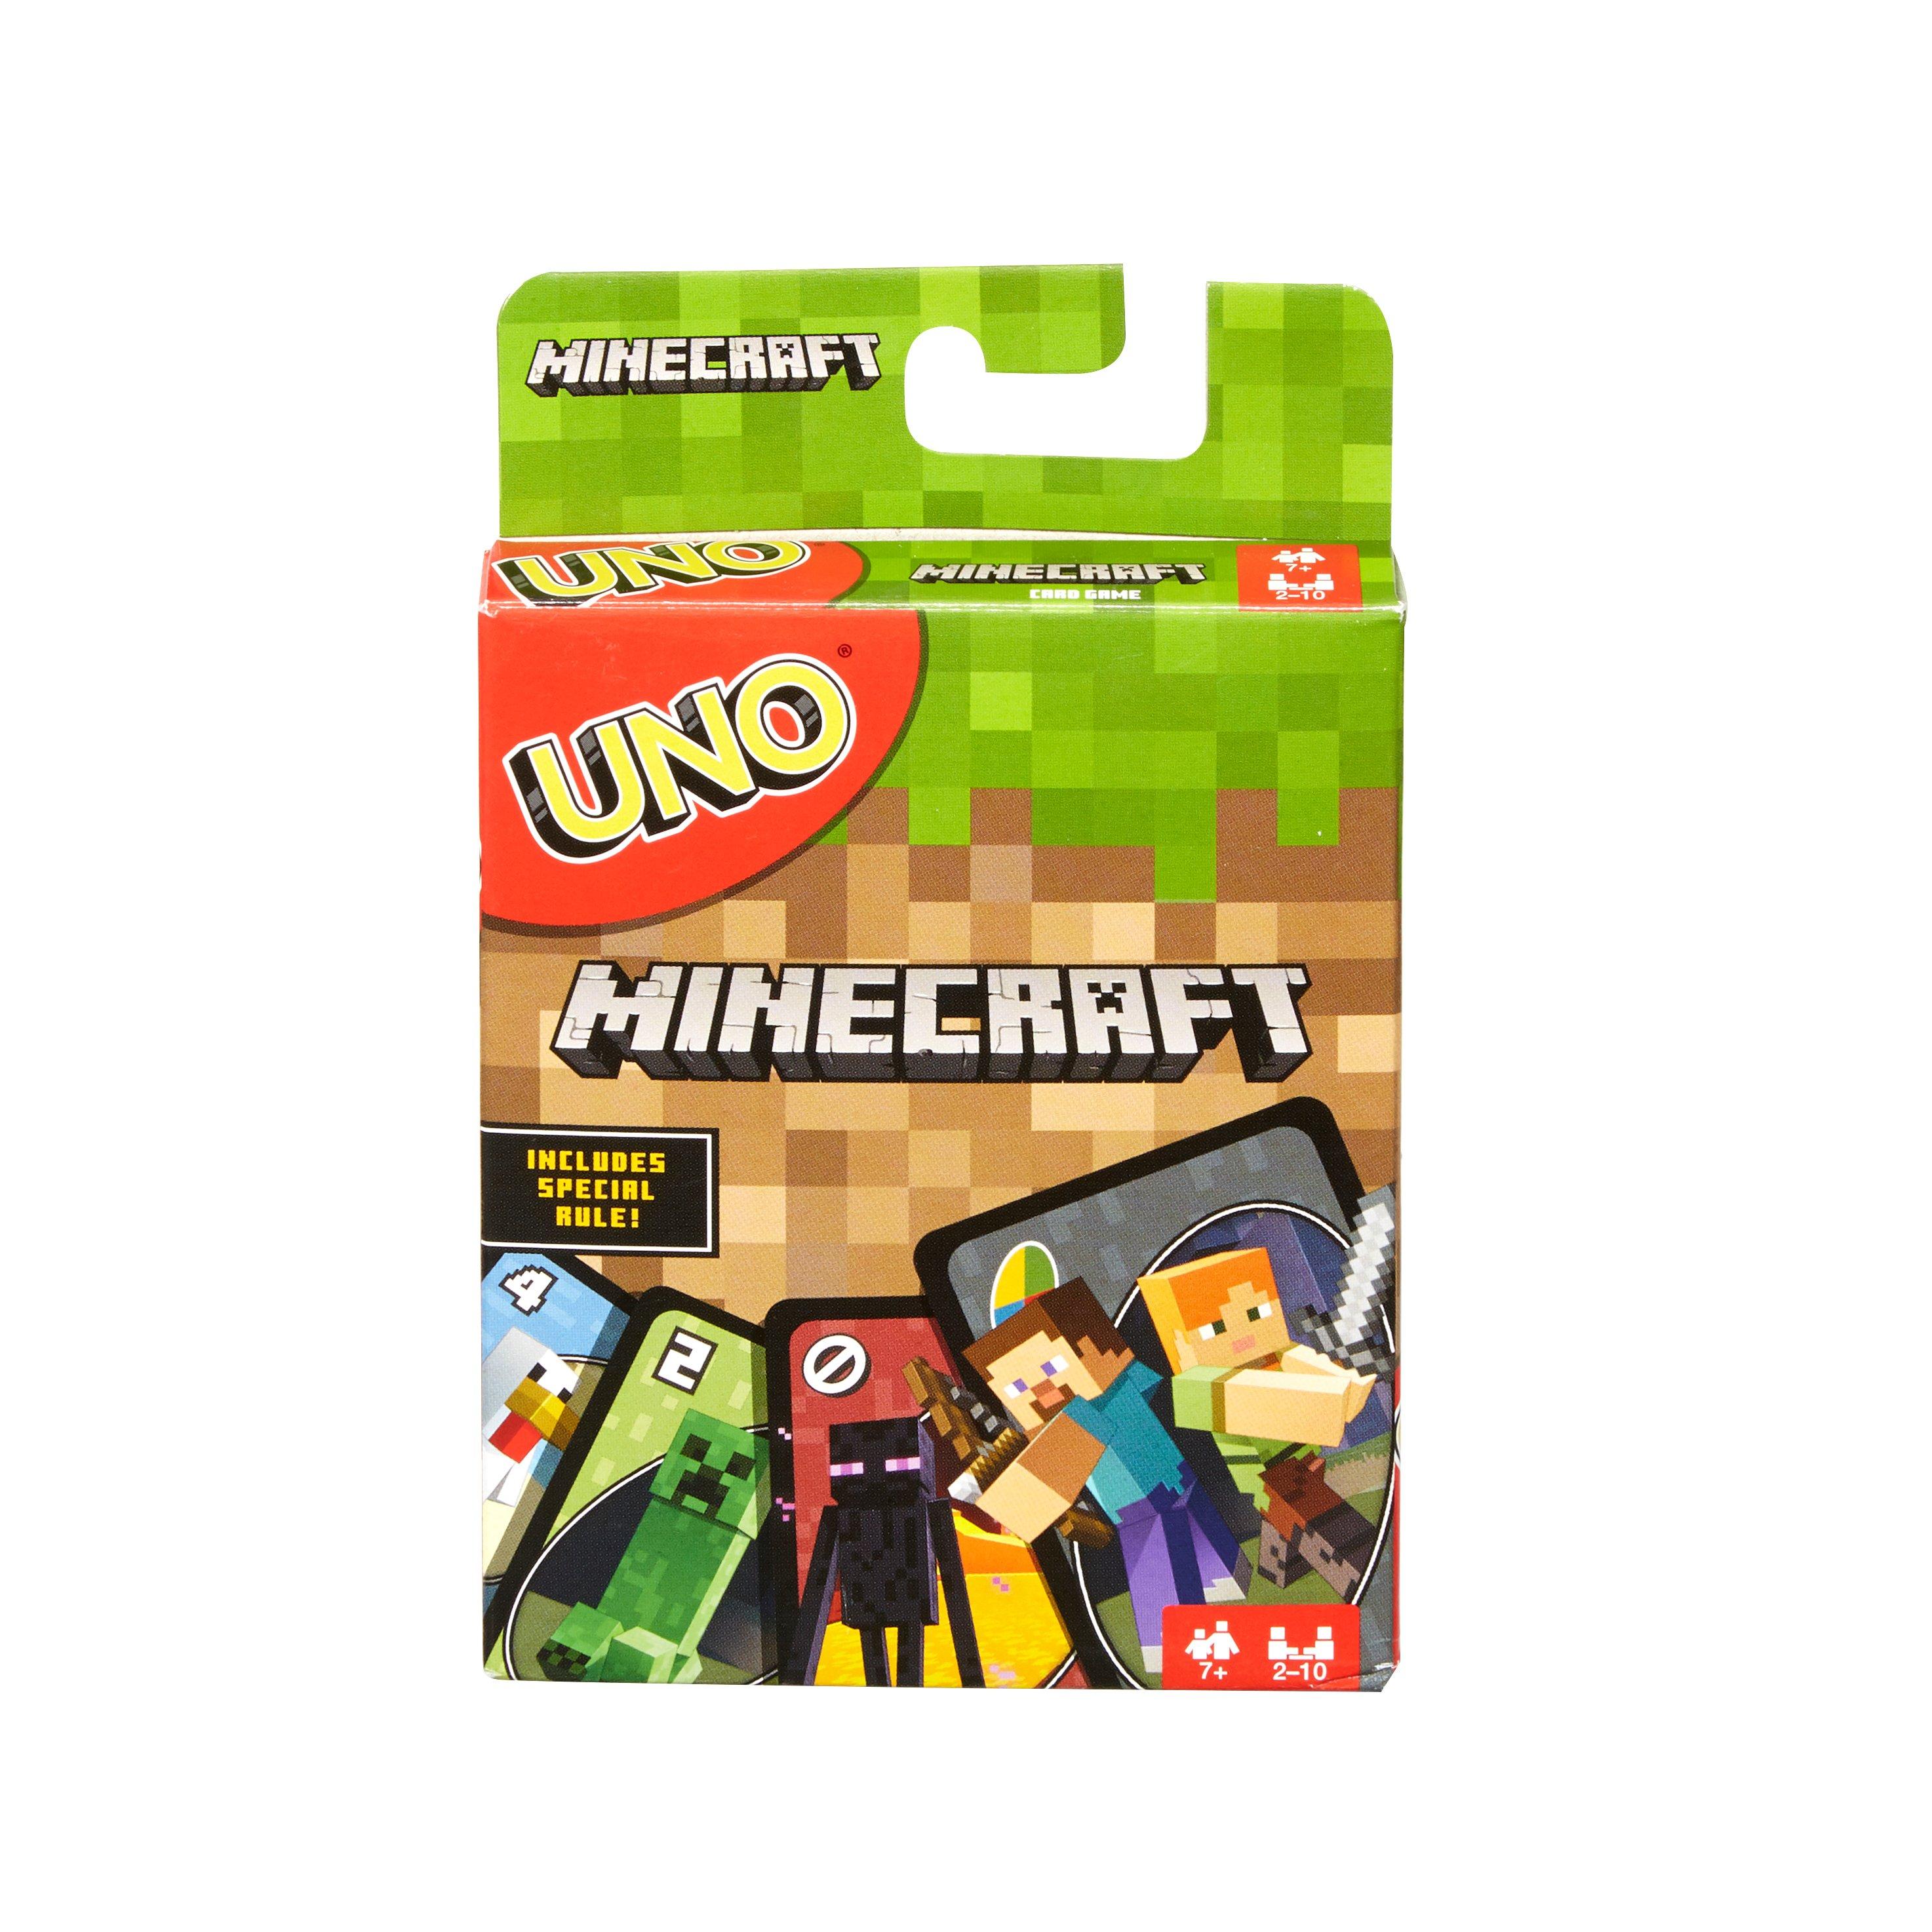 UNO Minecraft characters images Card Game special Creeper rule family friend fun 